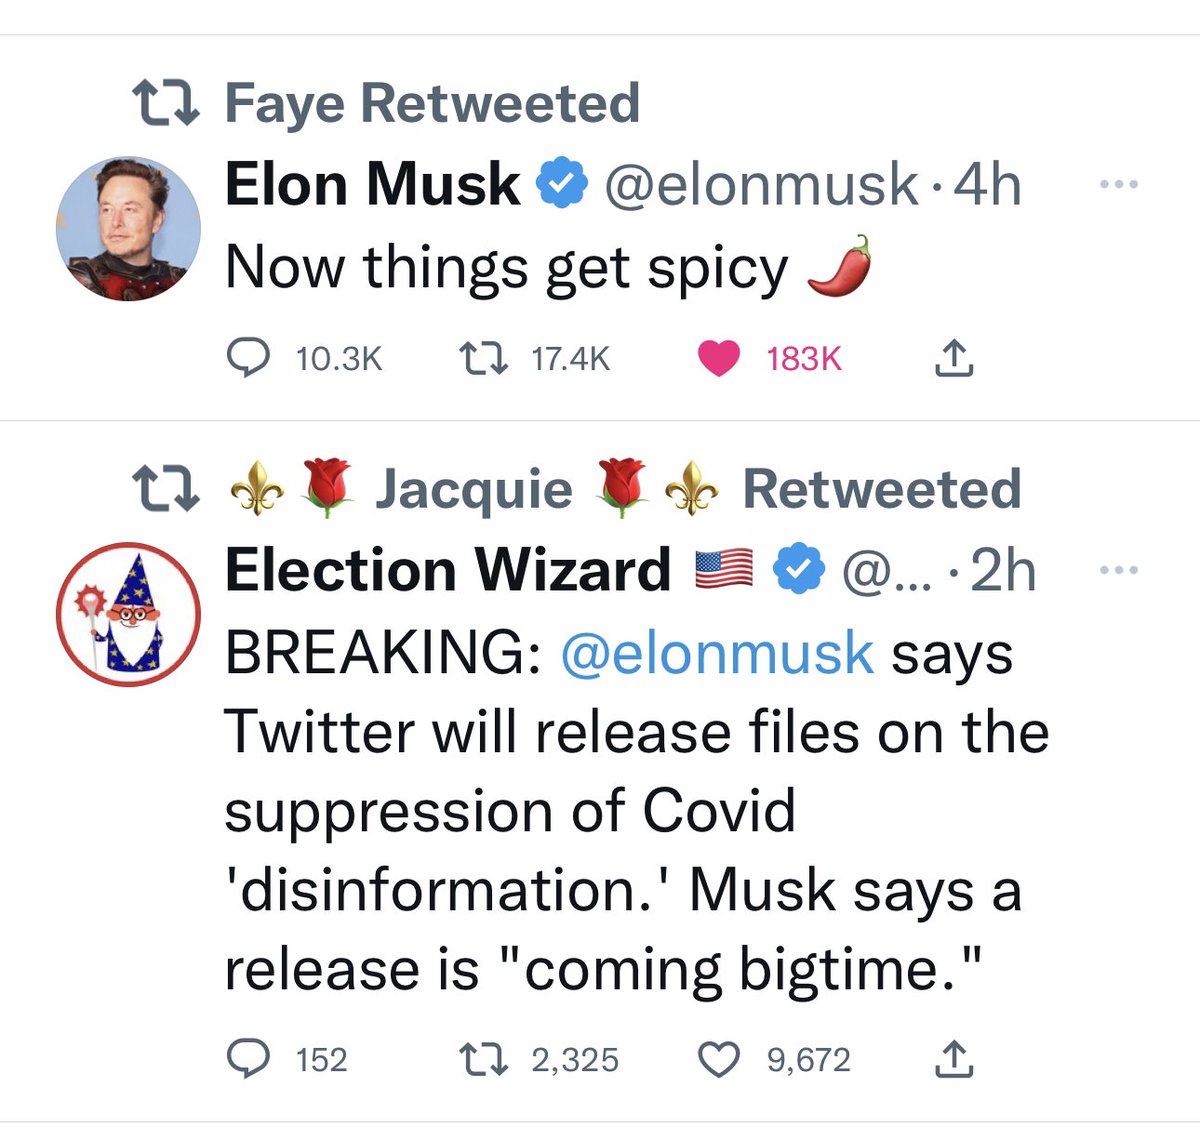 Elon also said his pronouns are Fauci/Jail - it’s going to be a great day! #letsgo #FJB #FFauci